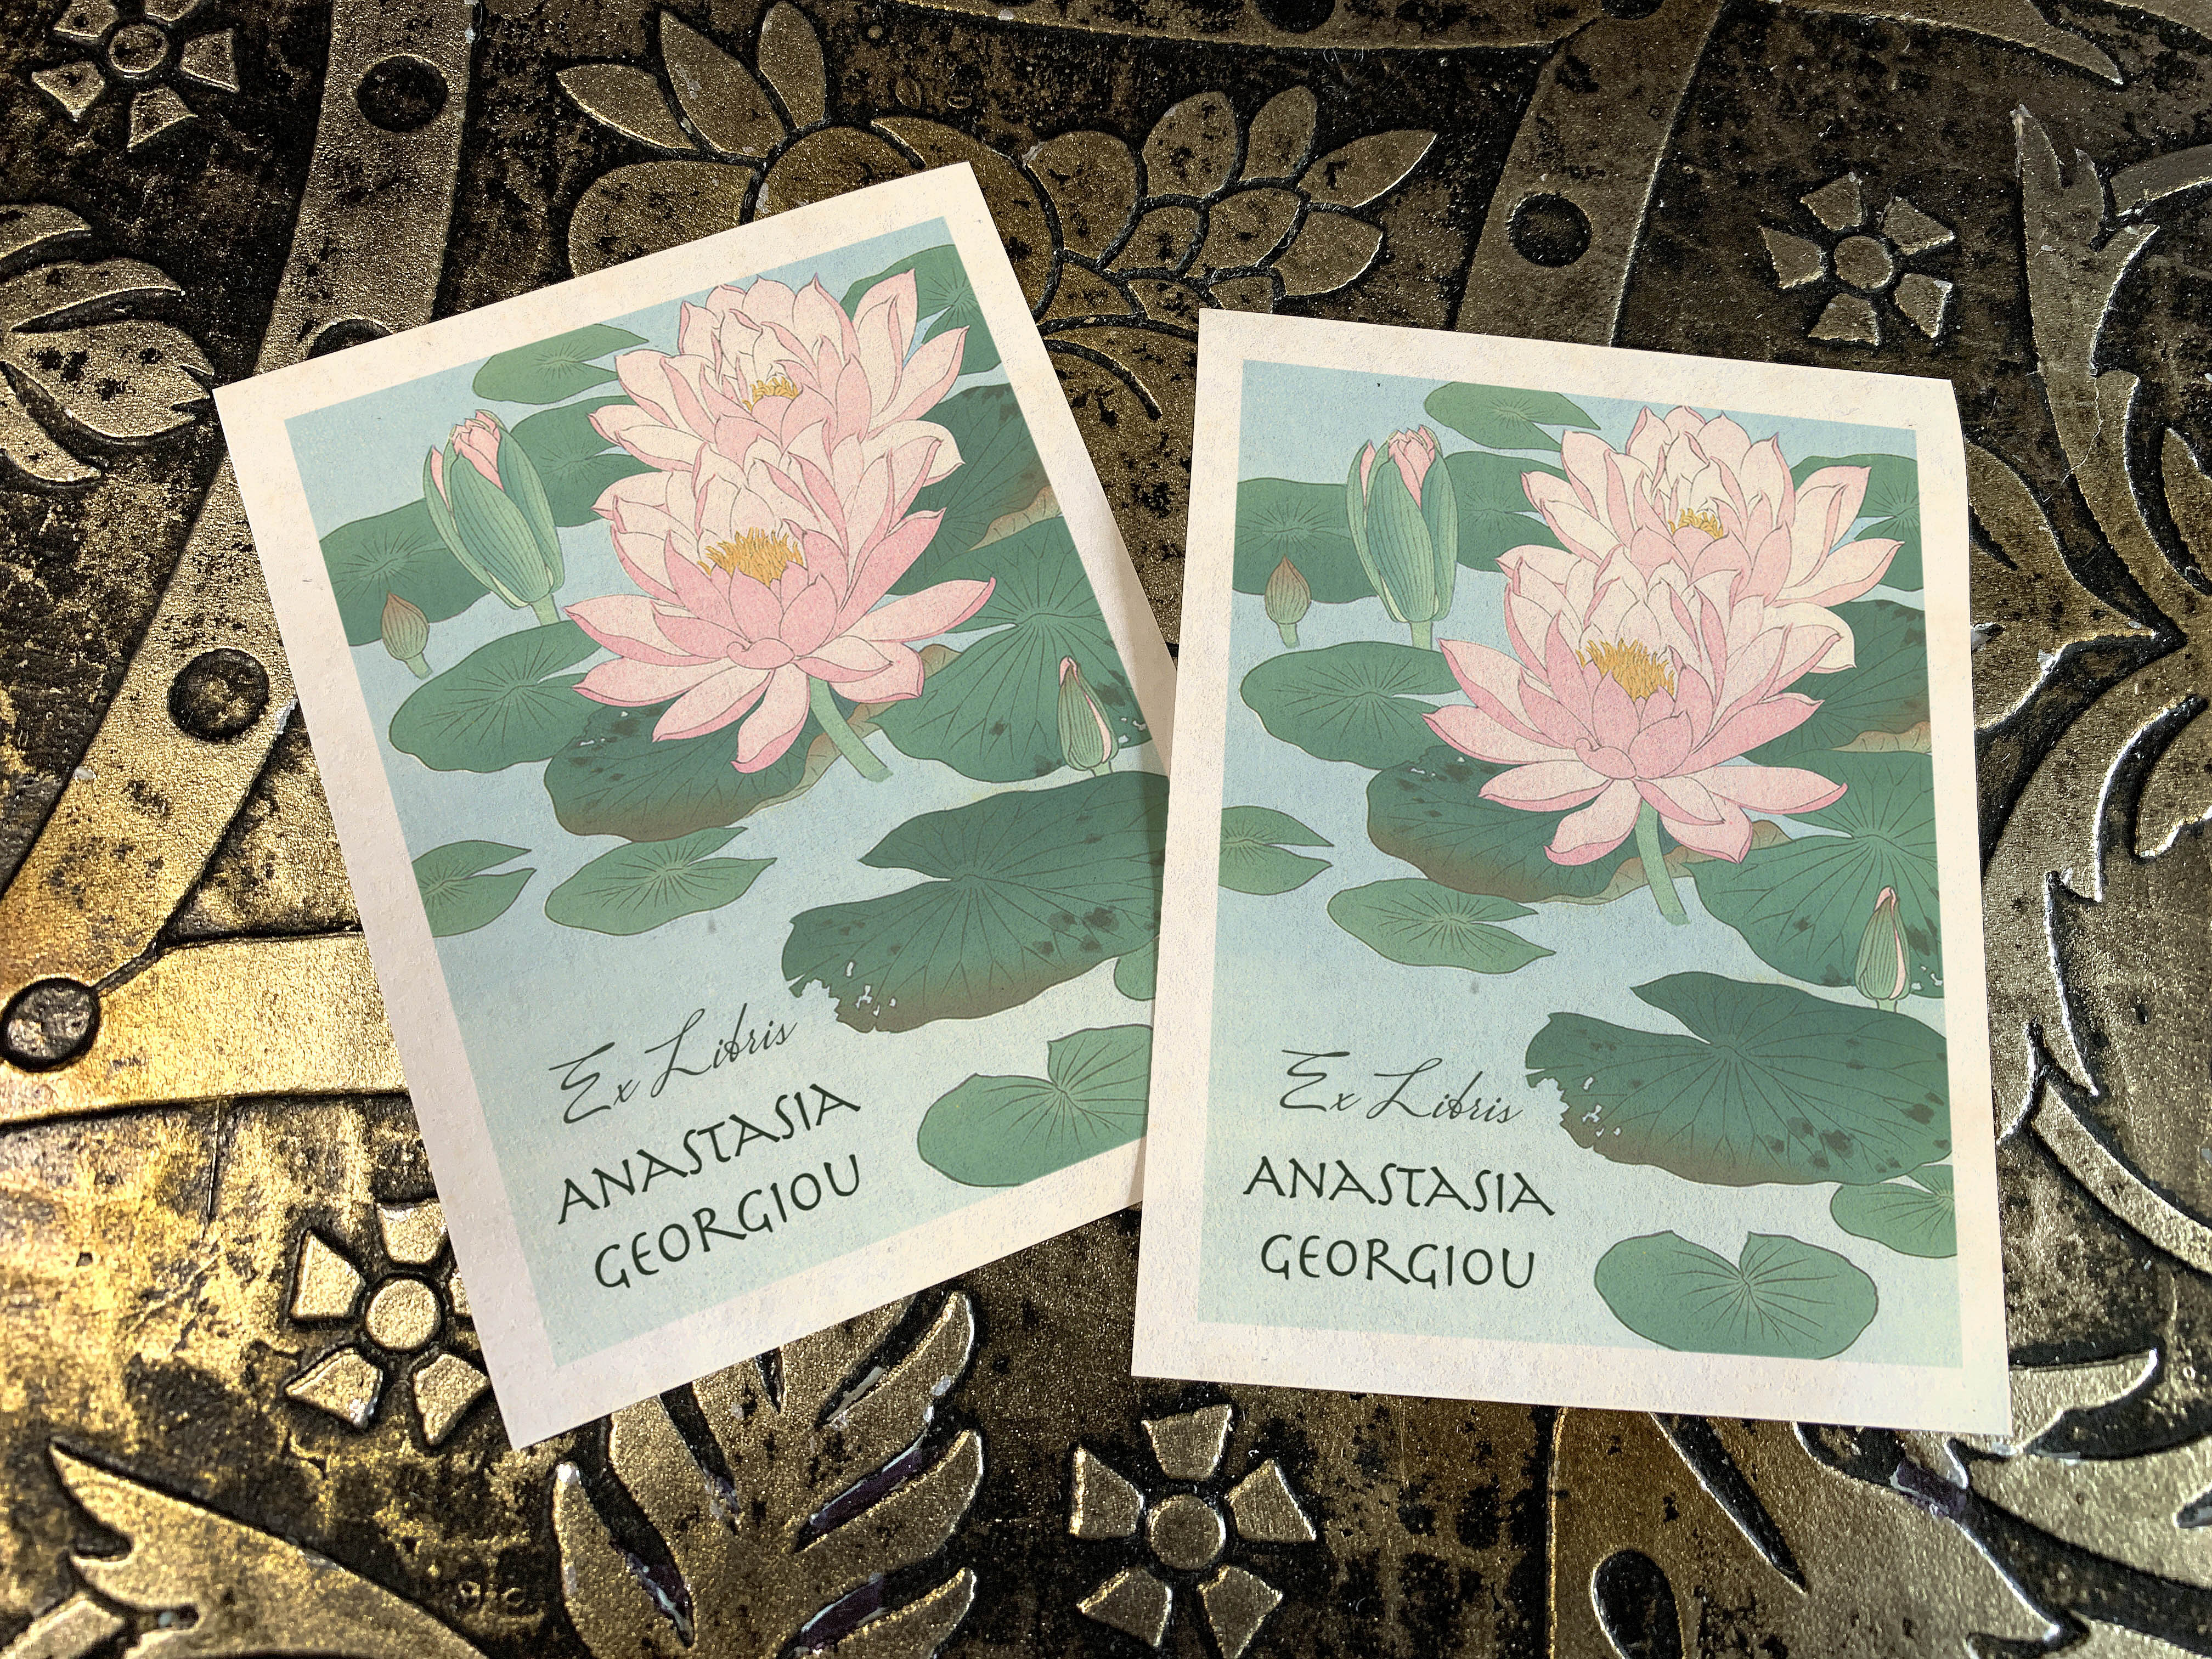 Waterlily by Ohara Koson, Personalized Ex-Libris Bookplates, Crafted on Traditional Gummed Paper, 3in x 4in, Set of 30